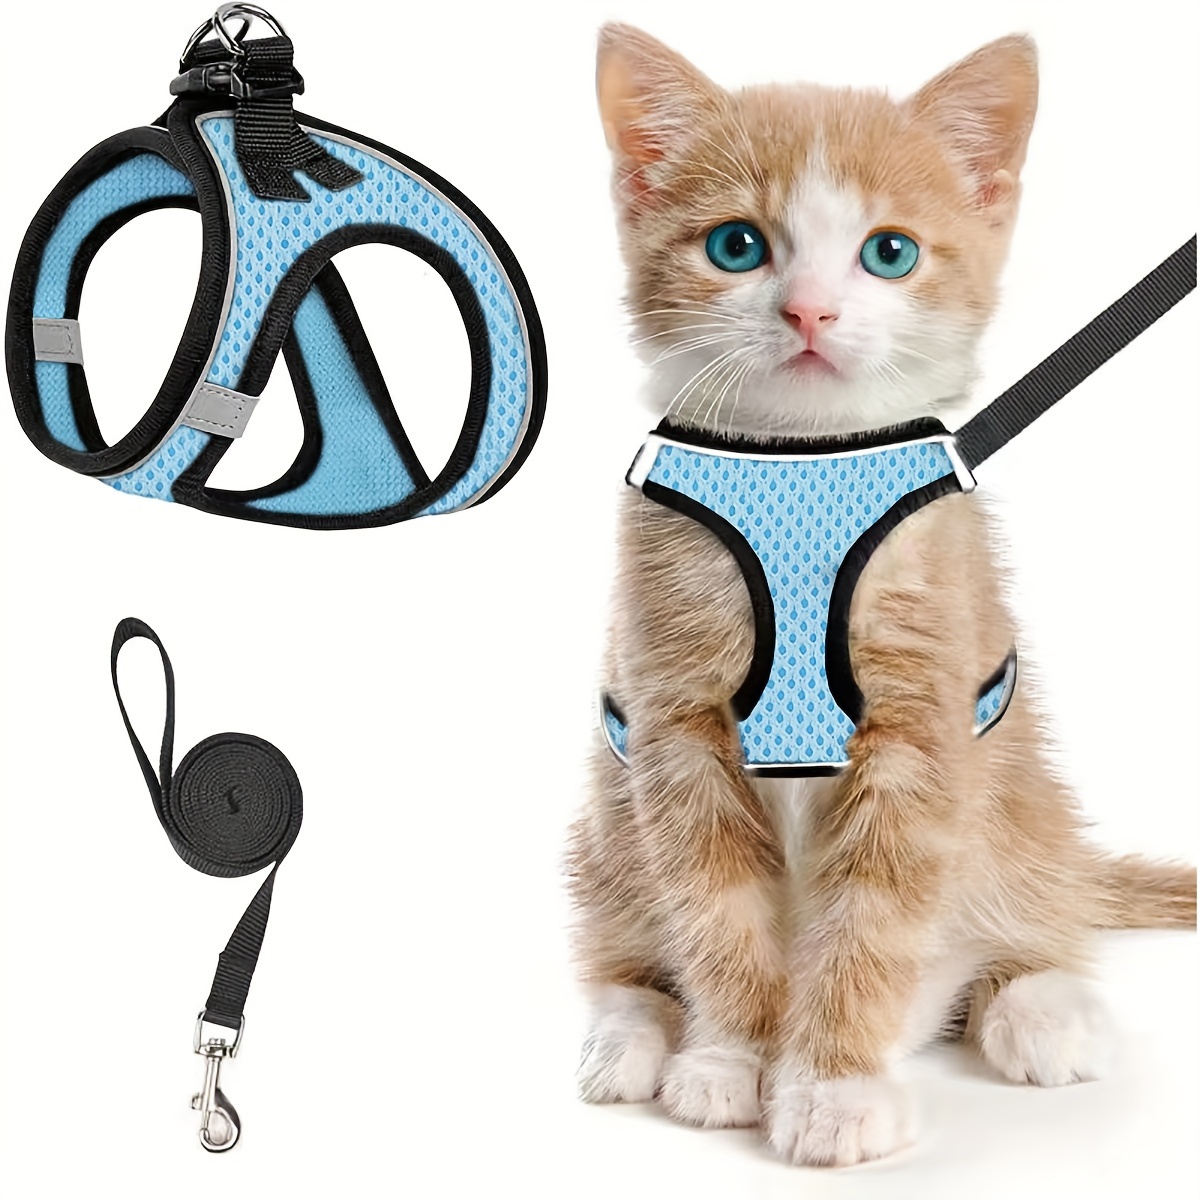 

Cat Harness And Leash For Walking Escape Proof, Adjustable Kitten Vest Harness Reflective Soft Mesh Puppy Harness For Outdoor, Easy To Control